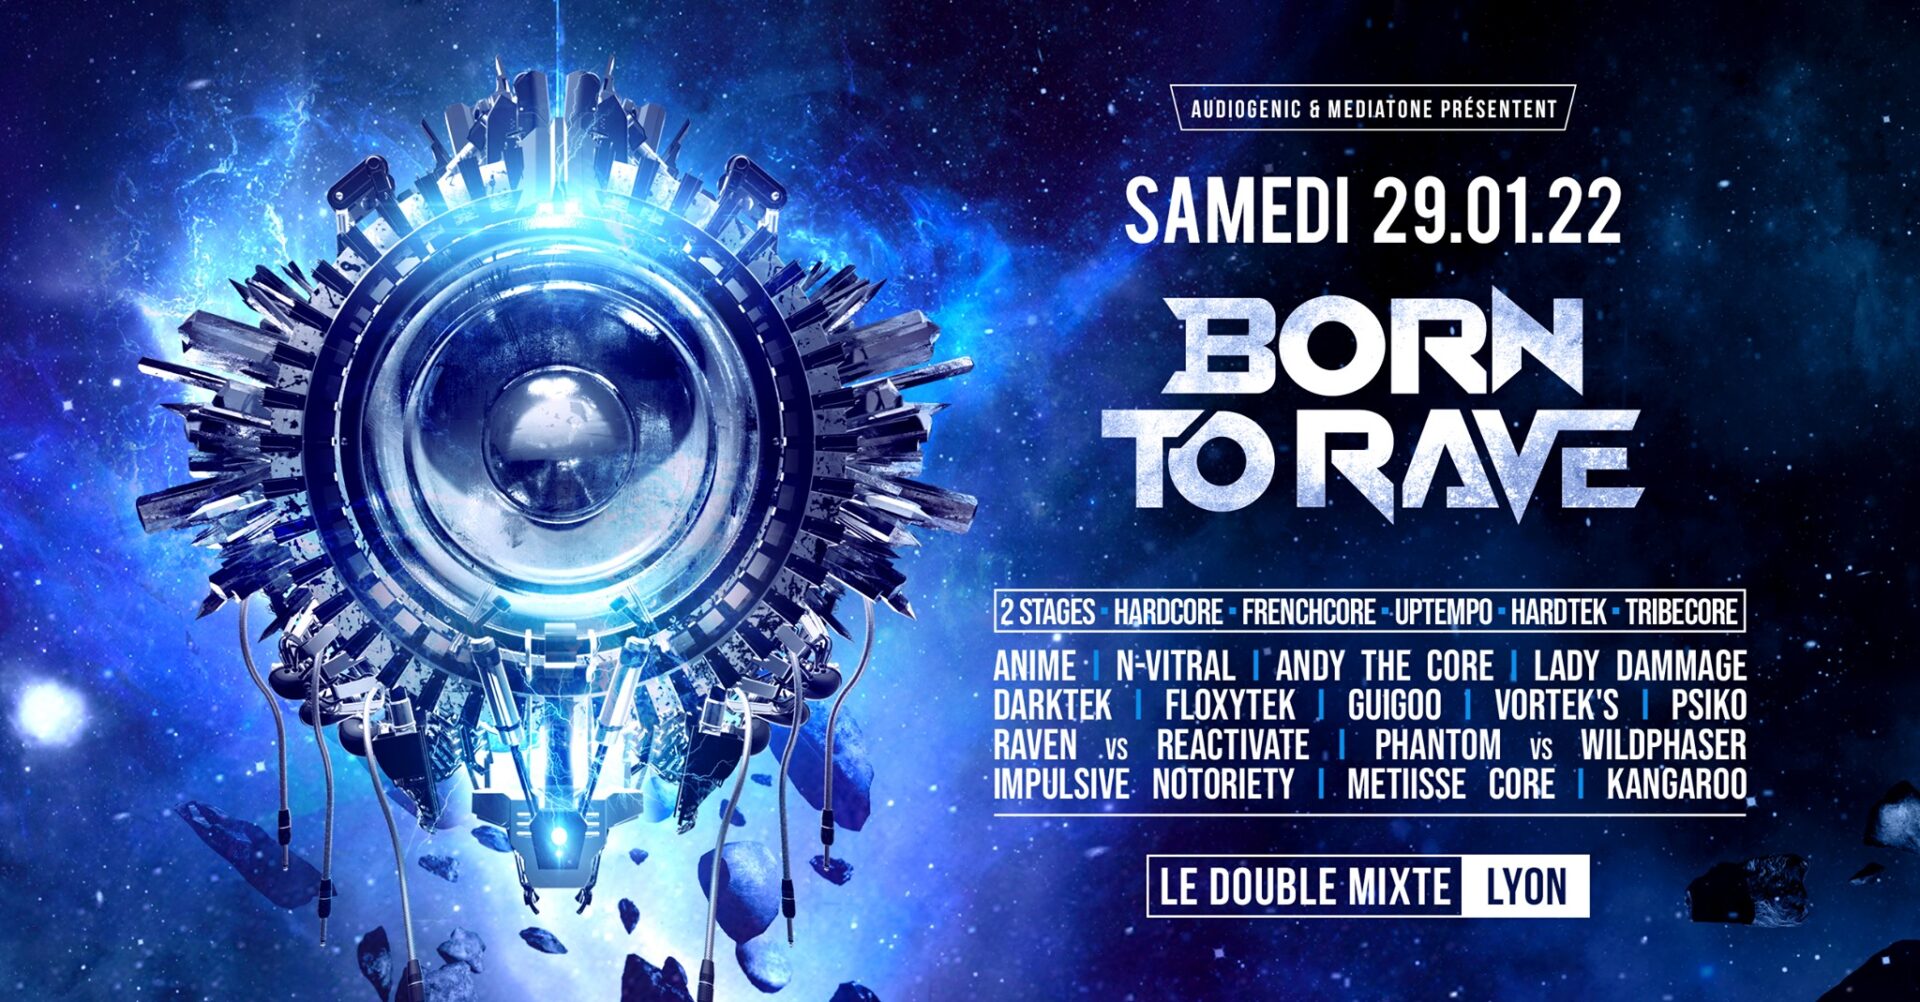 Get a chance to experience Born To Rave 2022 in Lyon!